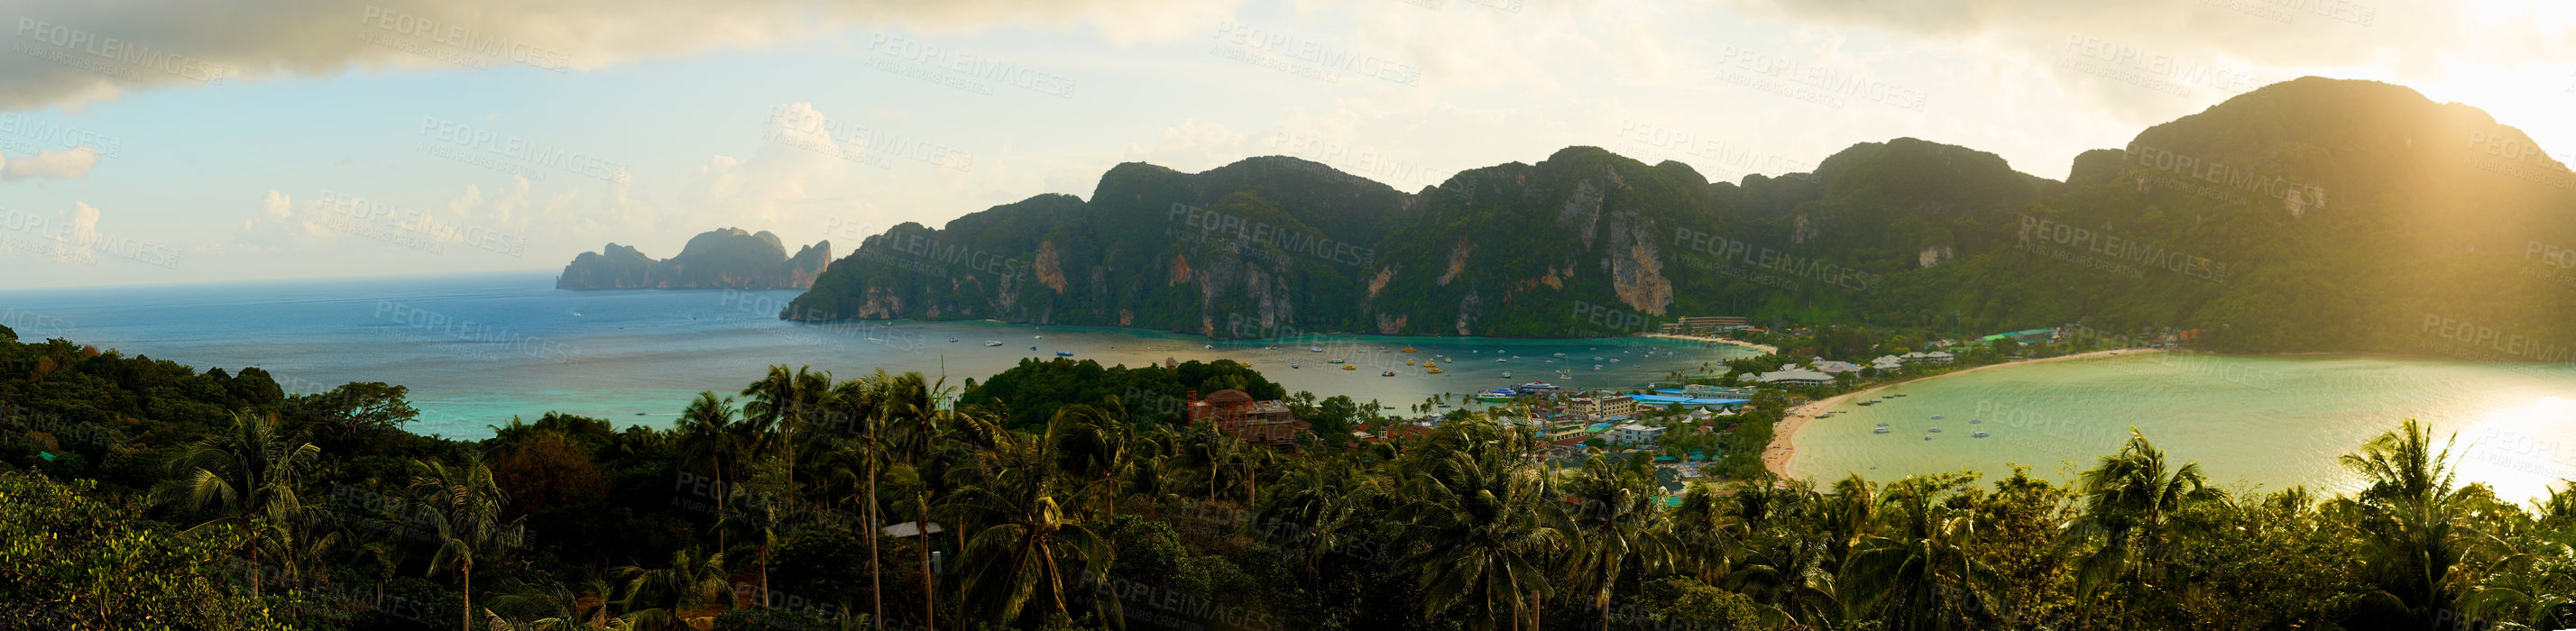 Buy stock photo Panoramic shot of an exotic island landscape